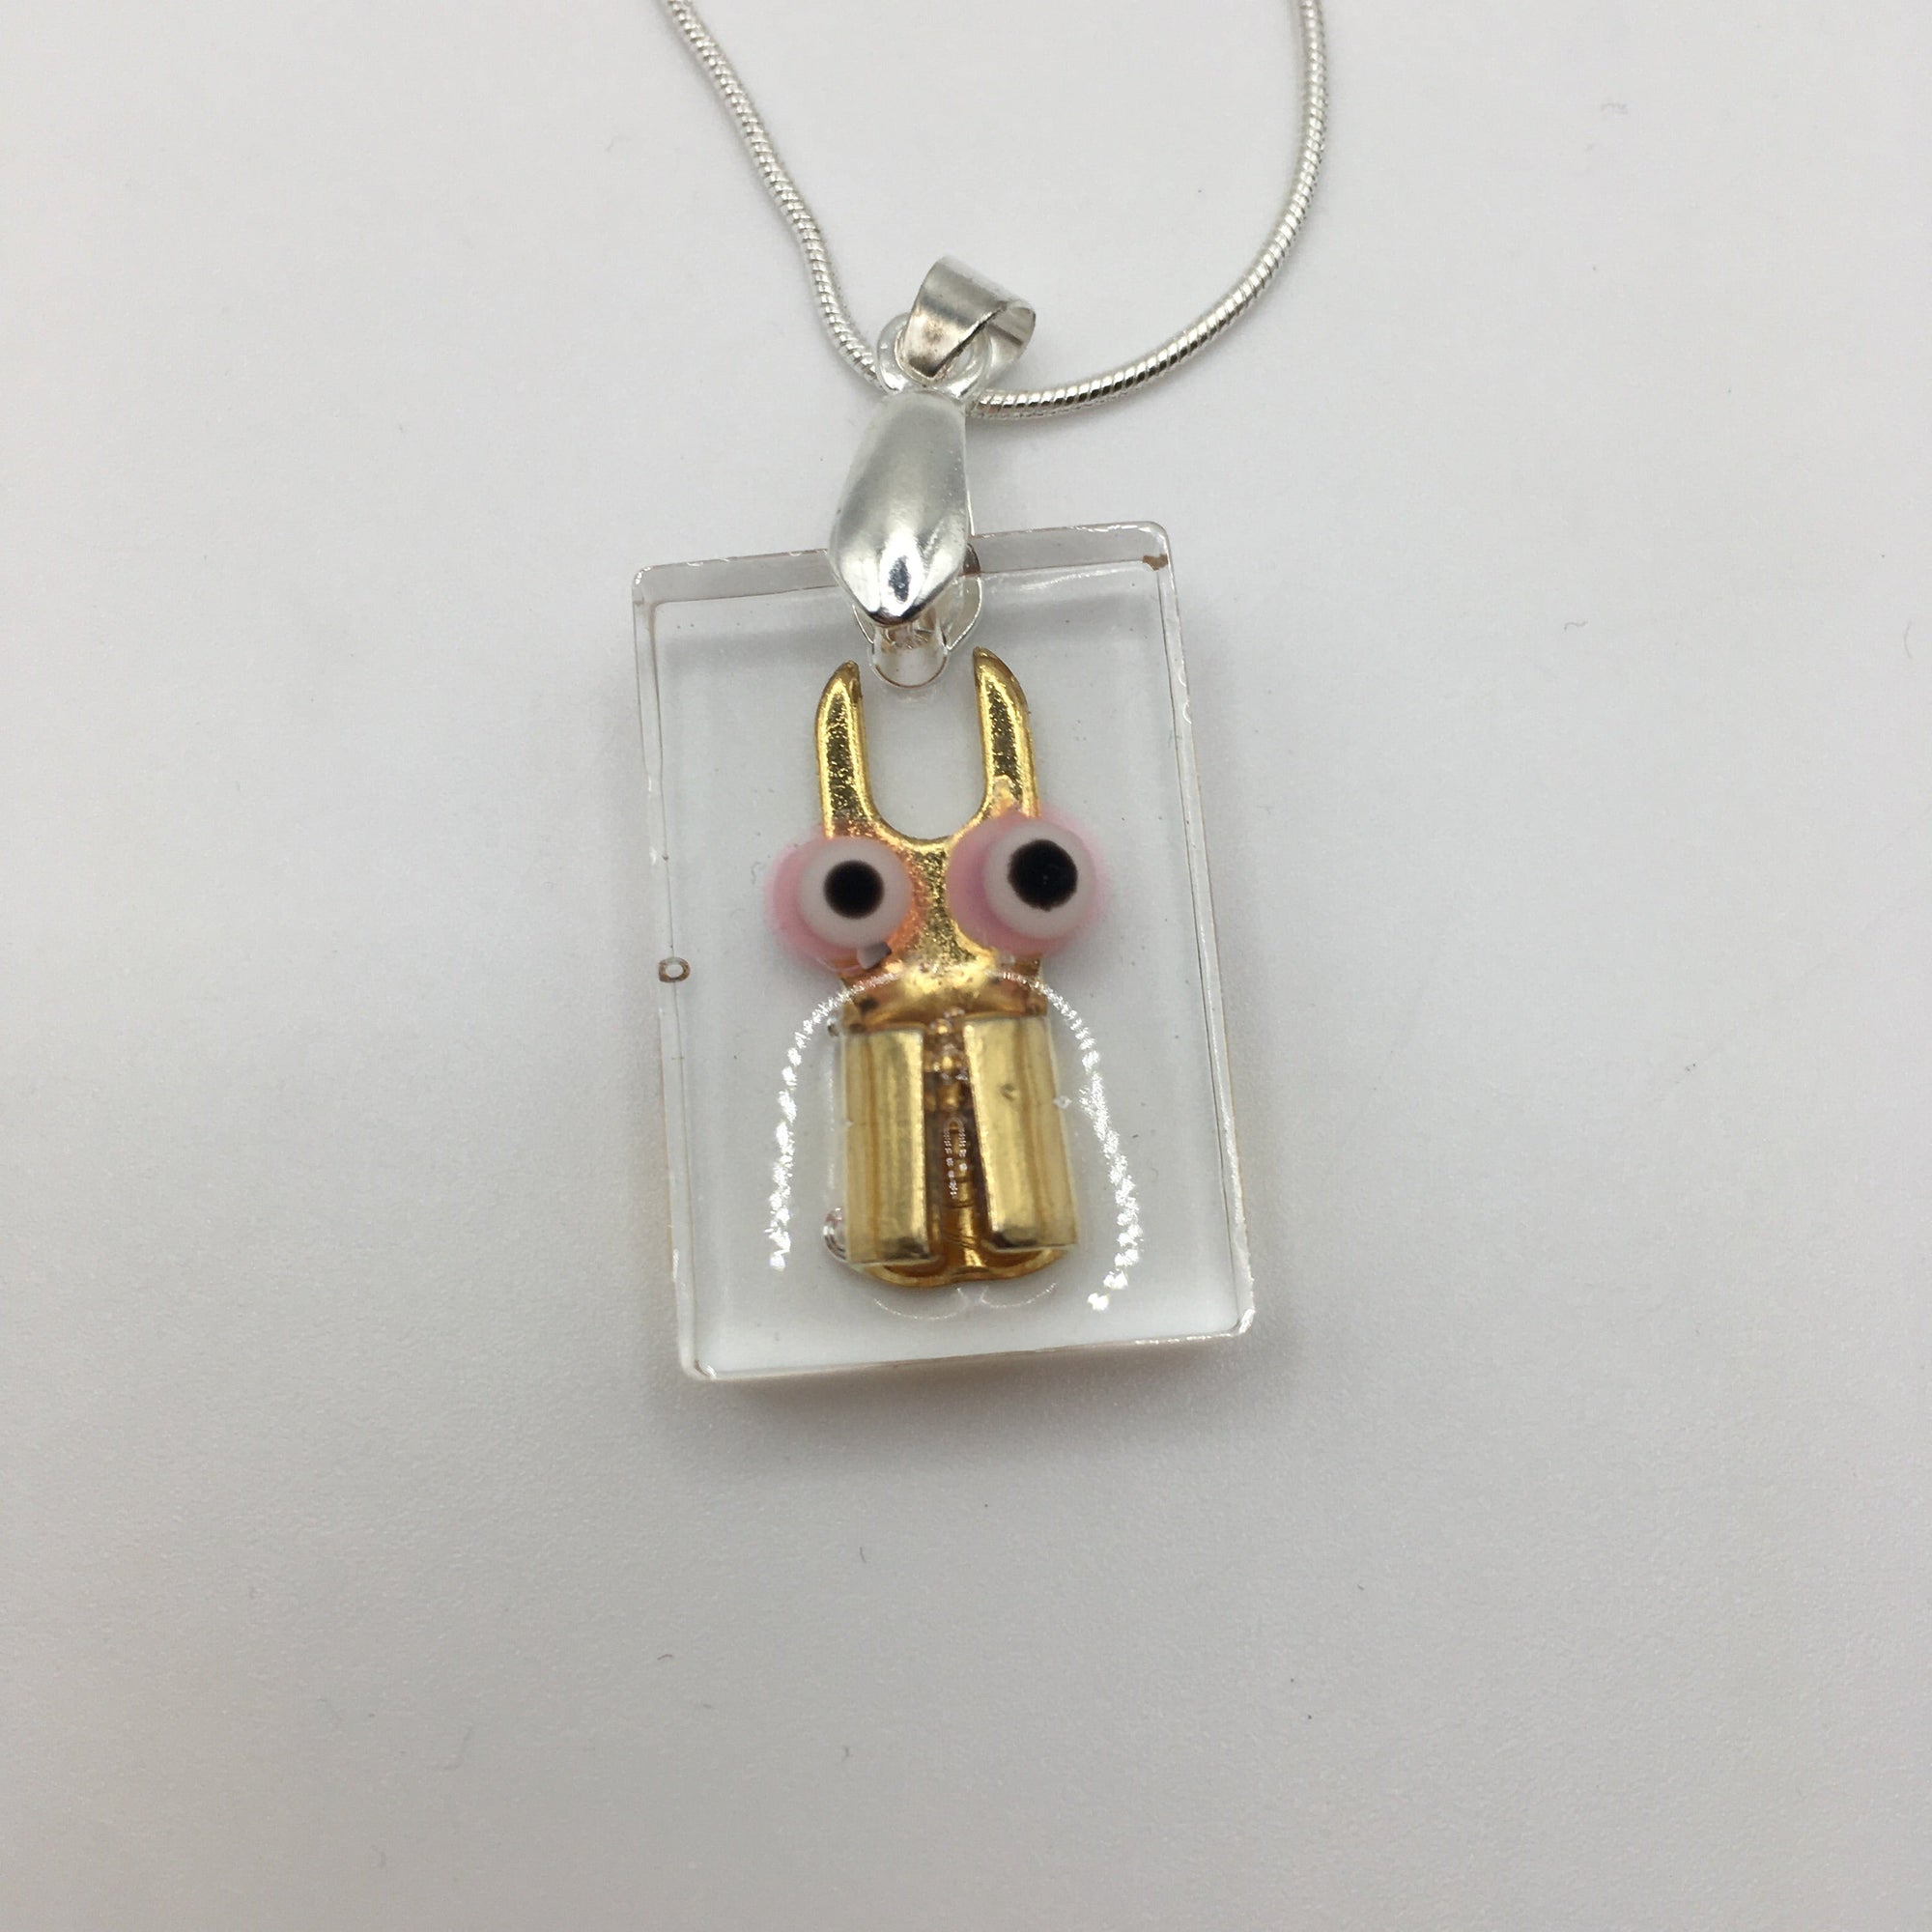 Cryobot Necklace - Pink and Rosy